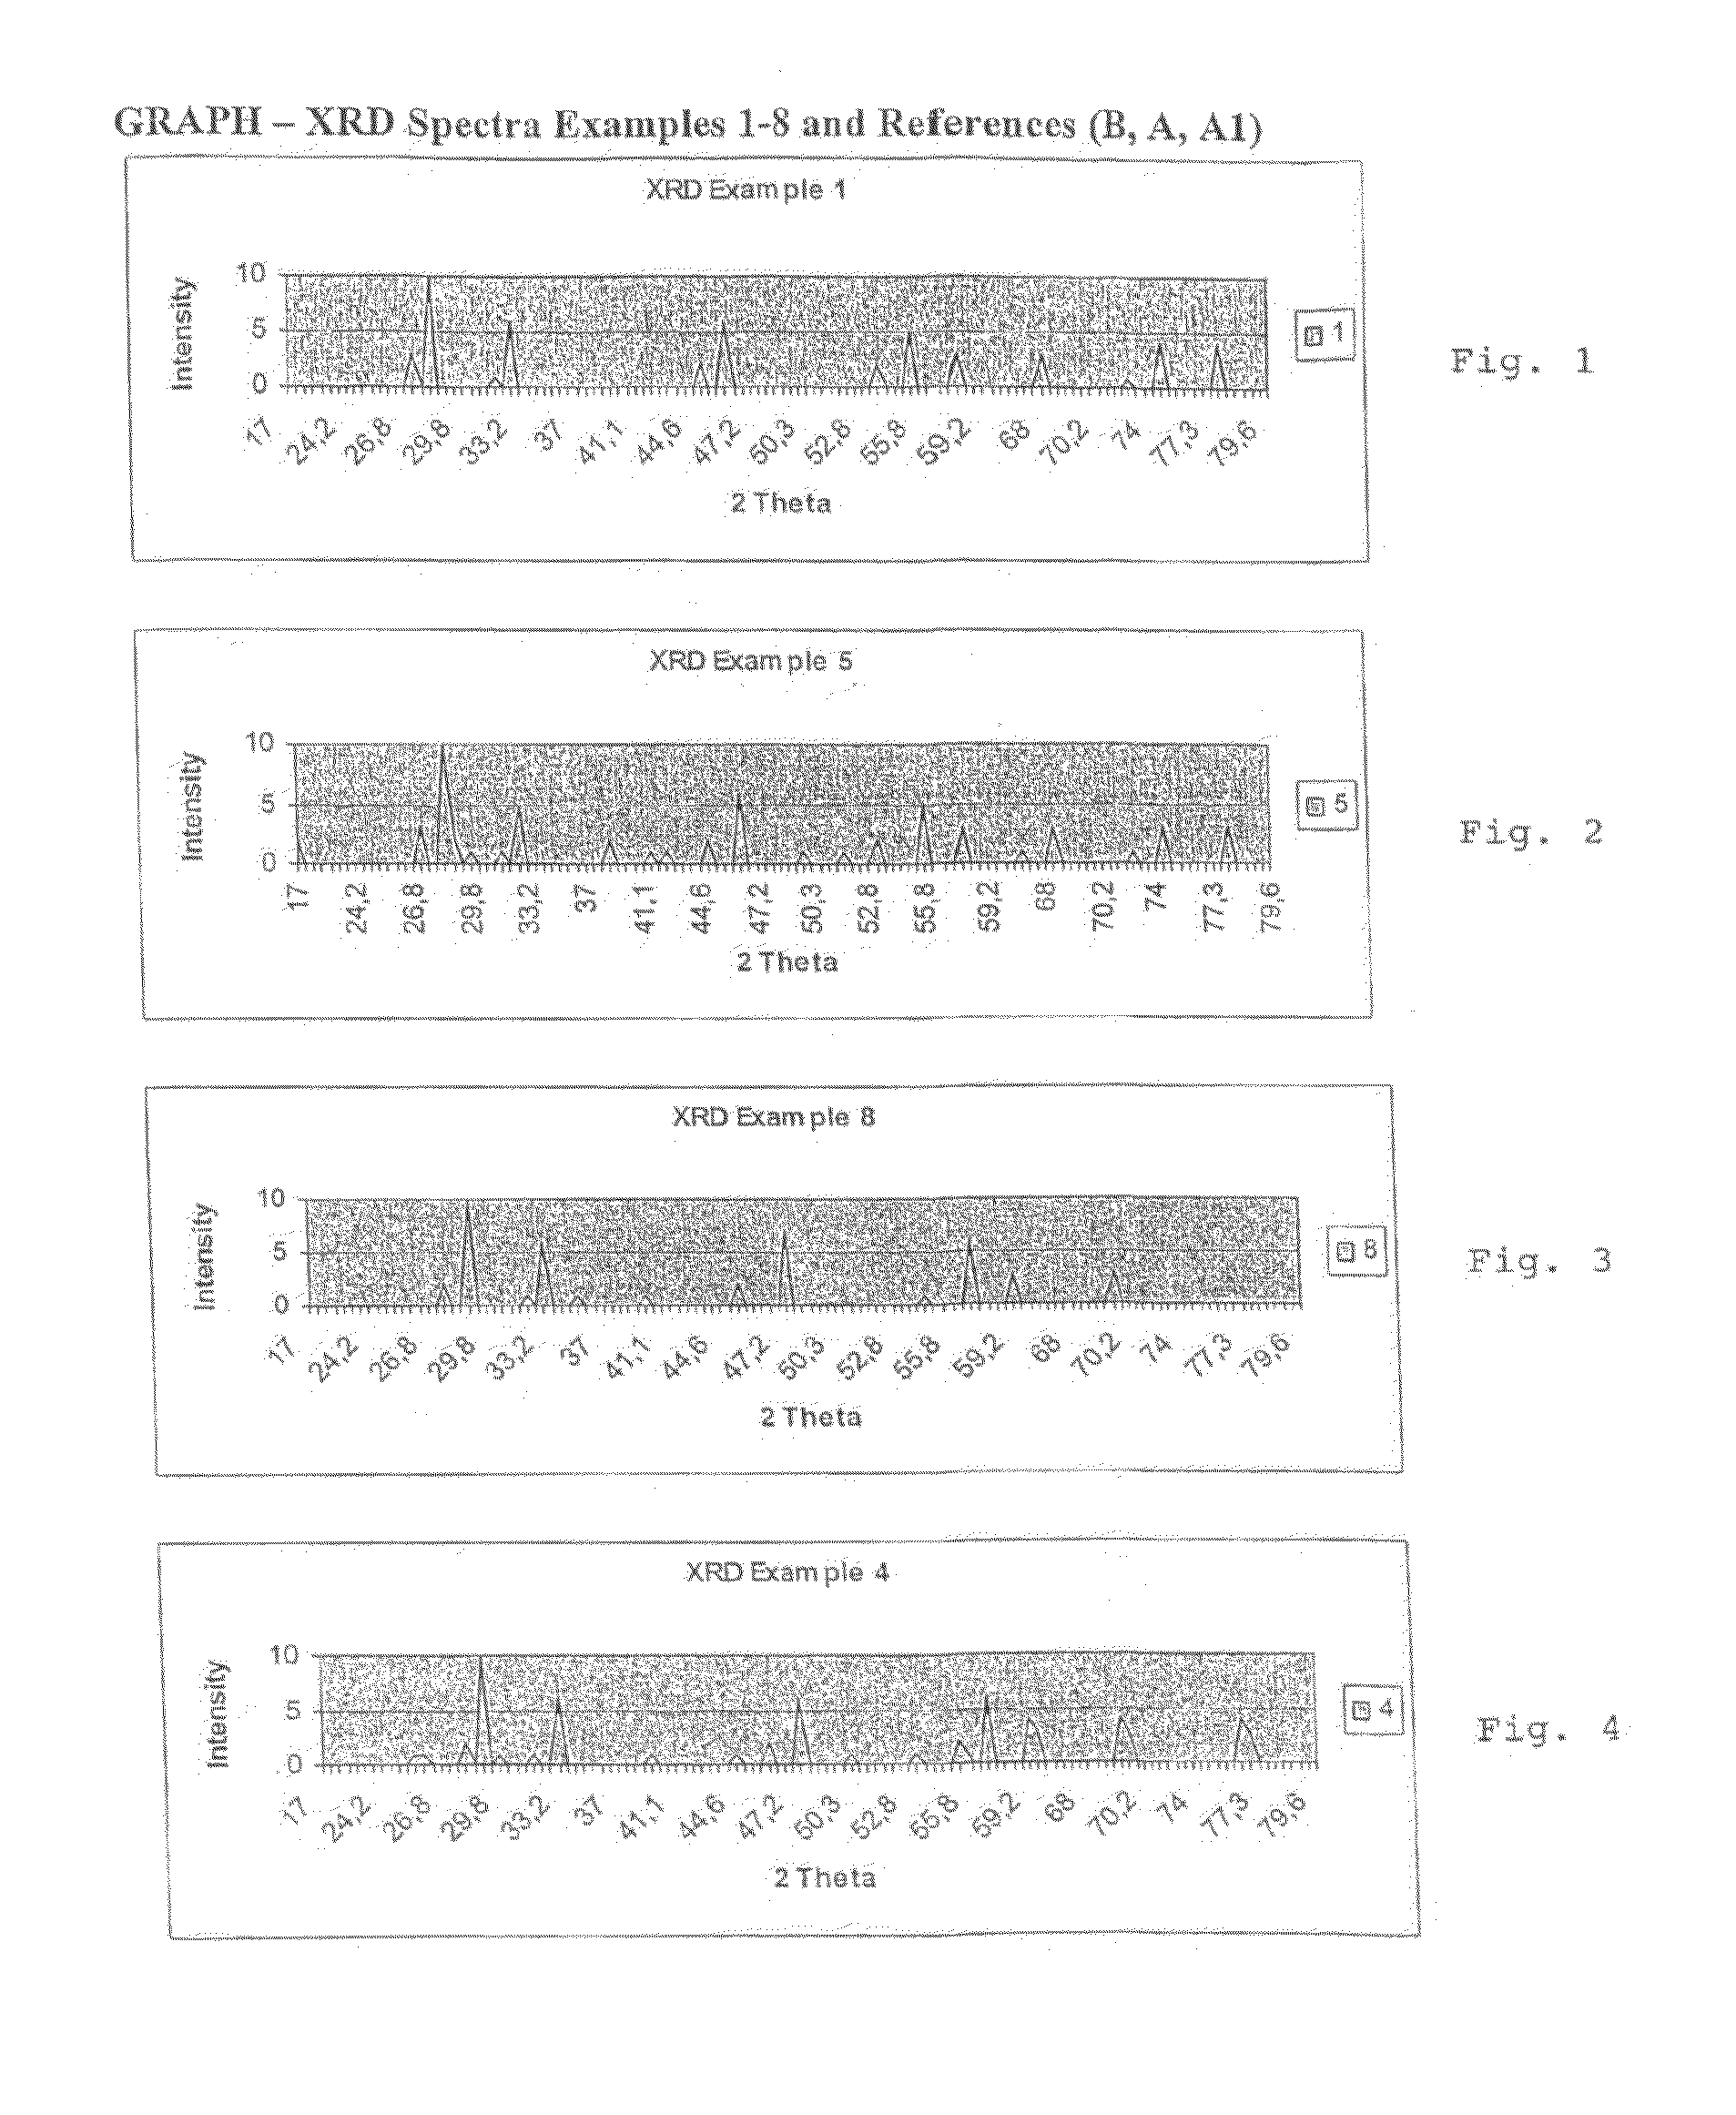 Ceria Based Glass Polishing Composition and a Process For the Manufacture Thereof